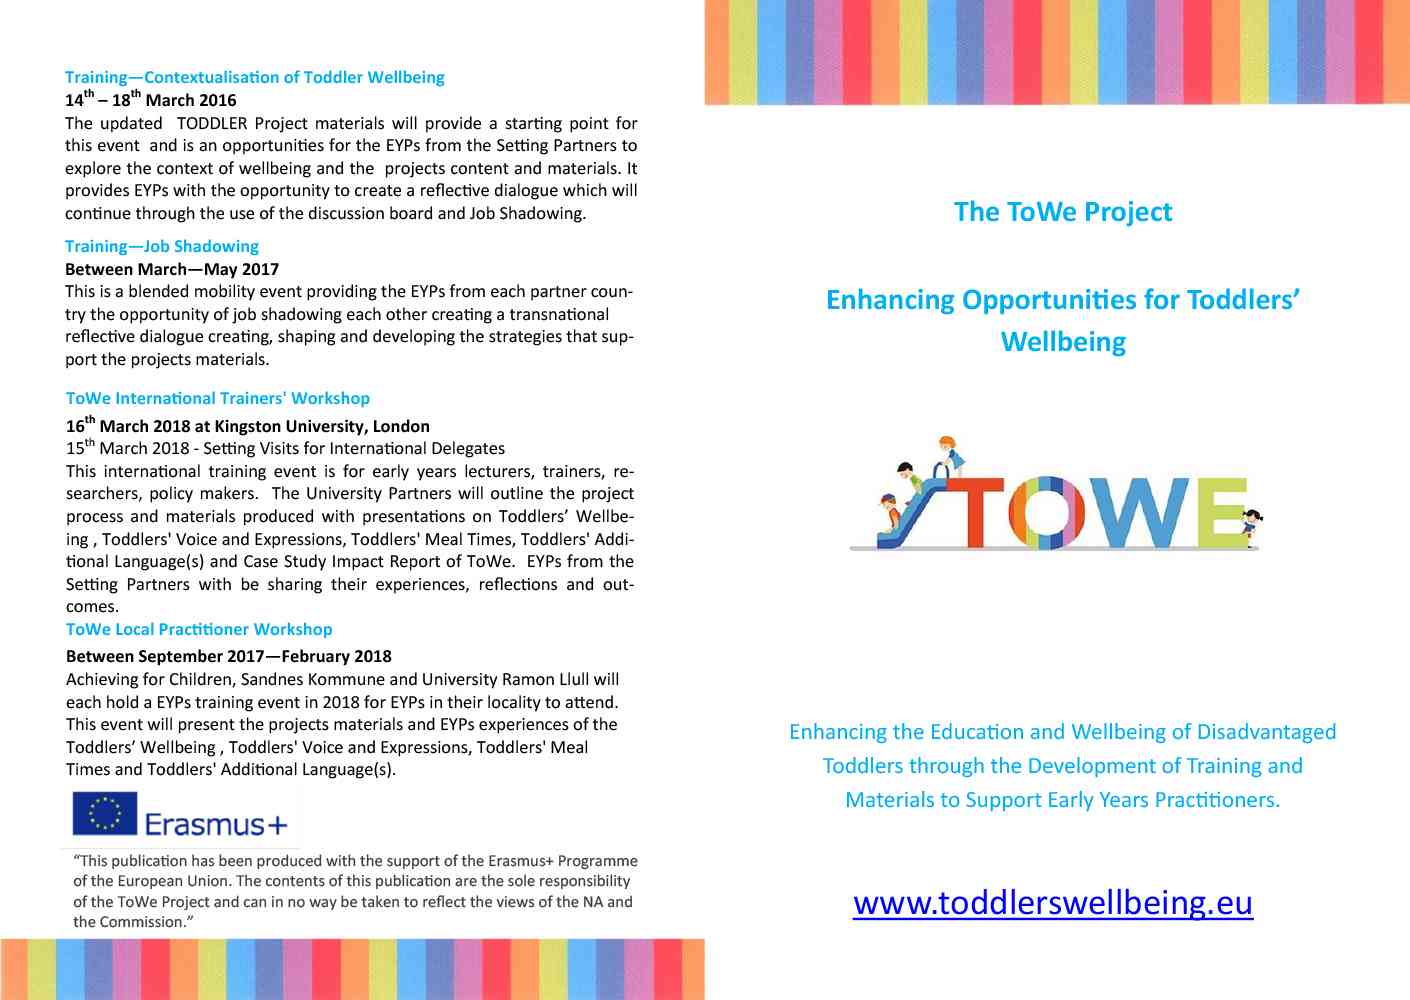 Information Leaflet on the ToWe Project part 1 - This leaflet provides information about the partners, aim of the project, project content and materials, events and training. https://www.toddlerswellbeing.co.uk/